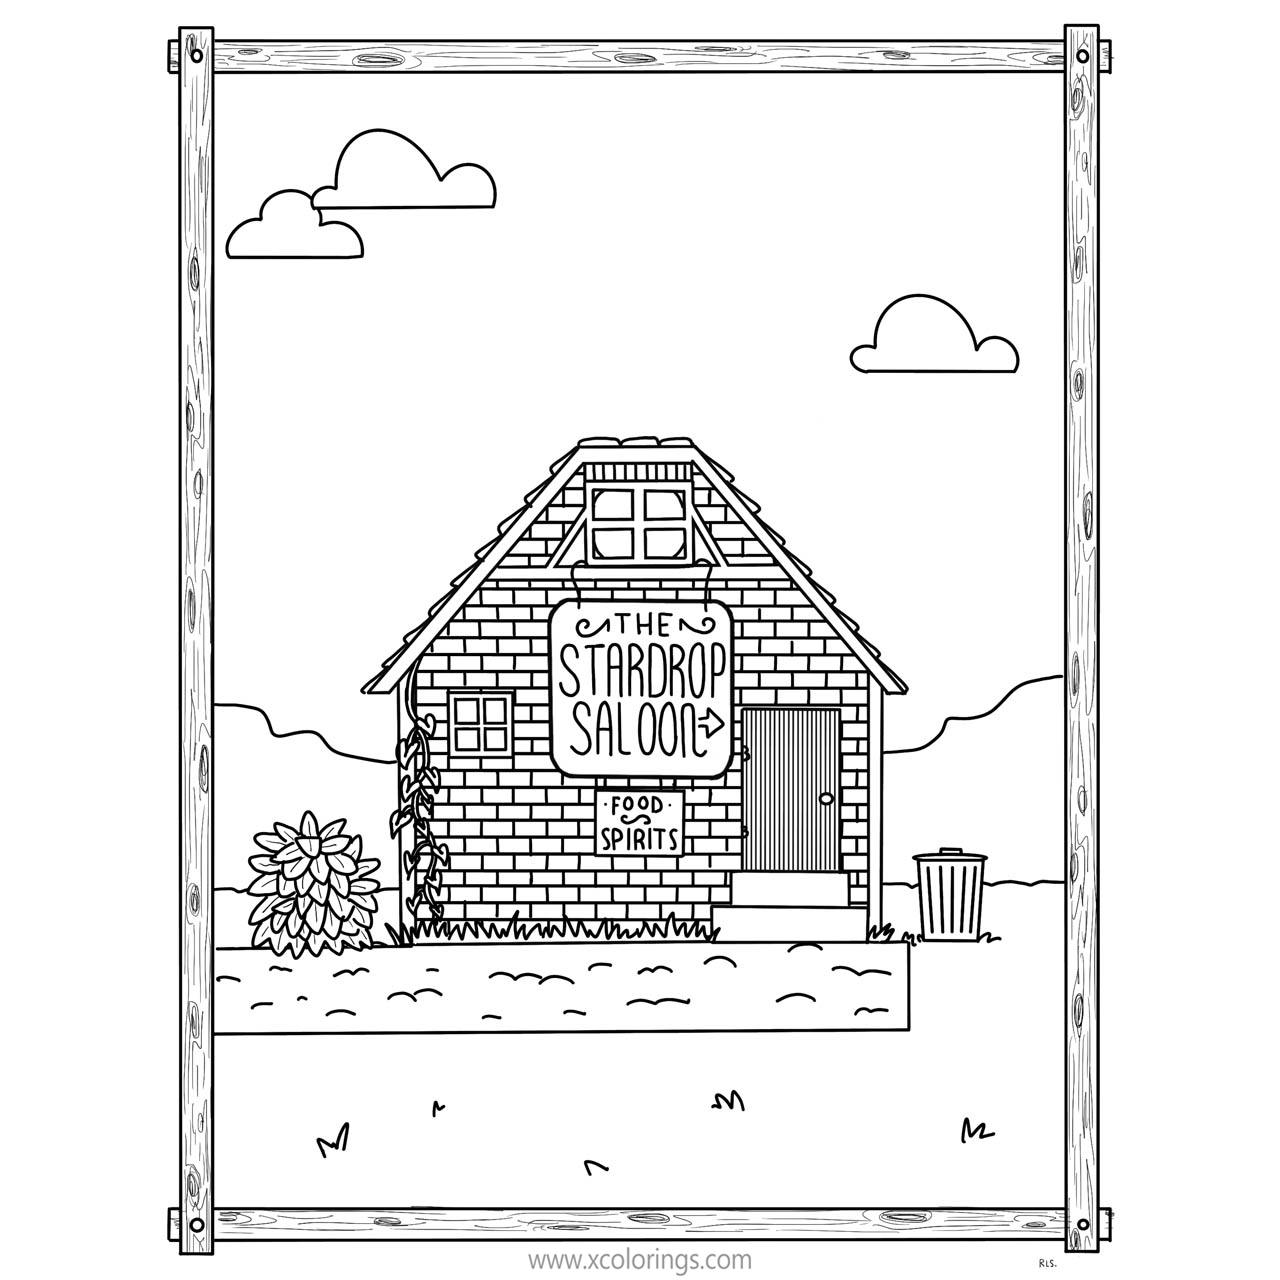 Free Stardew Valley Coloring Pages Fanart by RobynSmith printable